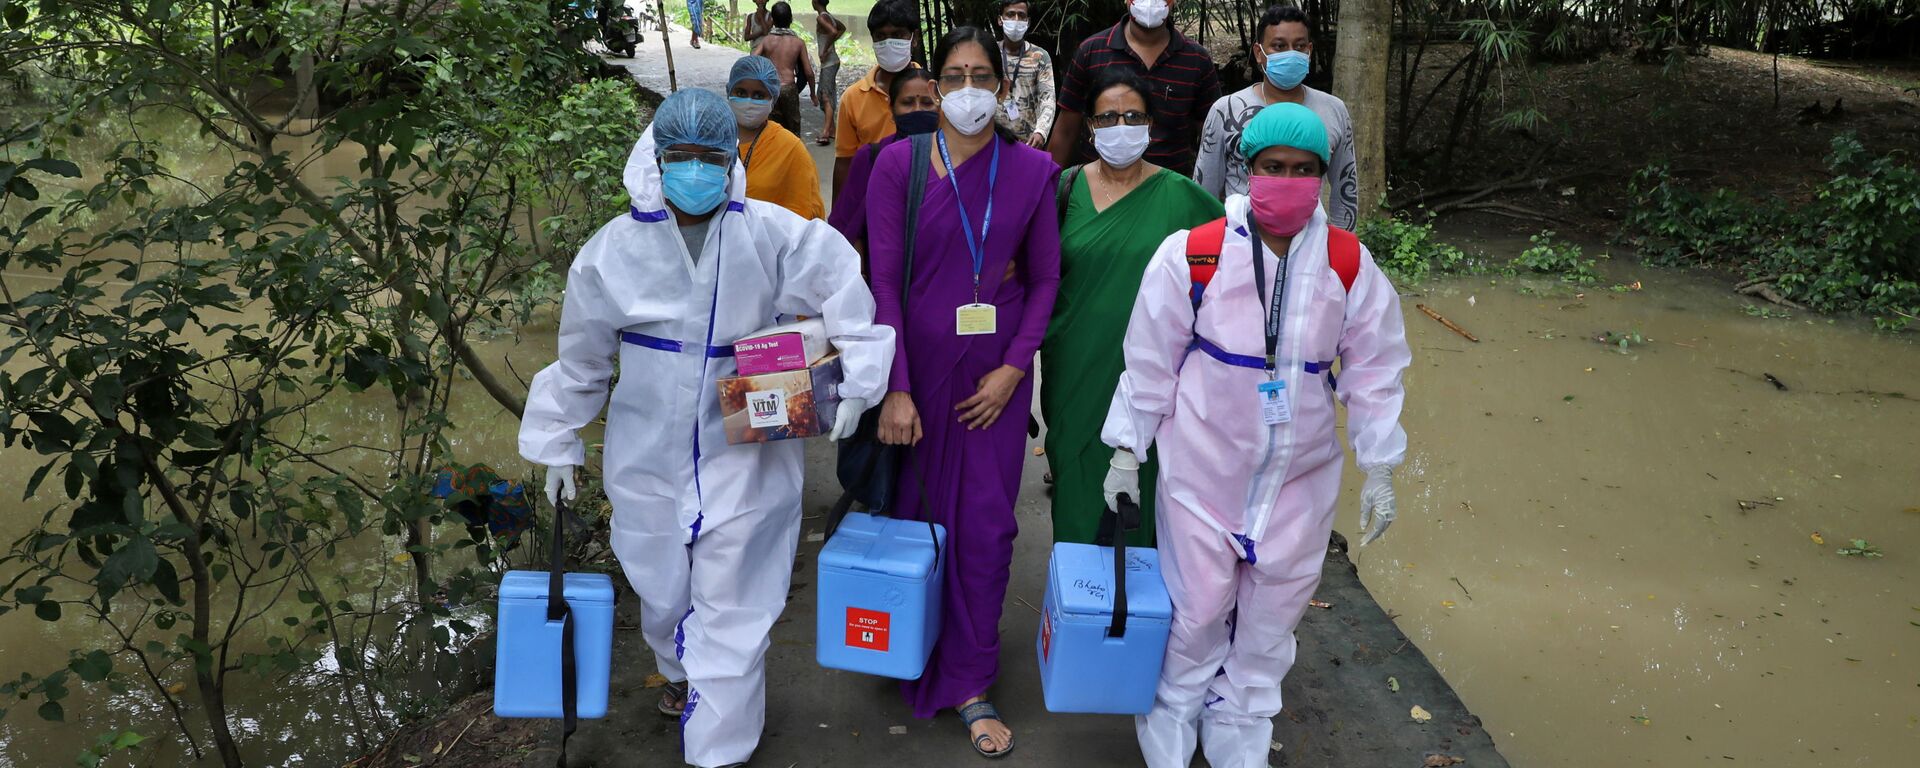 Healthcare workers carry COVISHIELD vaccine, a coronavirus disease (COVID-19) vaccine manufactured by Serum Institute of India, to inoculate villagers during a door-to-door vaccination and testing drive at Uttar Batora Island in Howrah district in West Bengal state, India, June 21, 2021 - Sputnik International, 1920, 20.08.2021